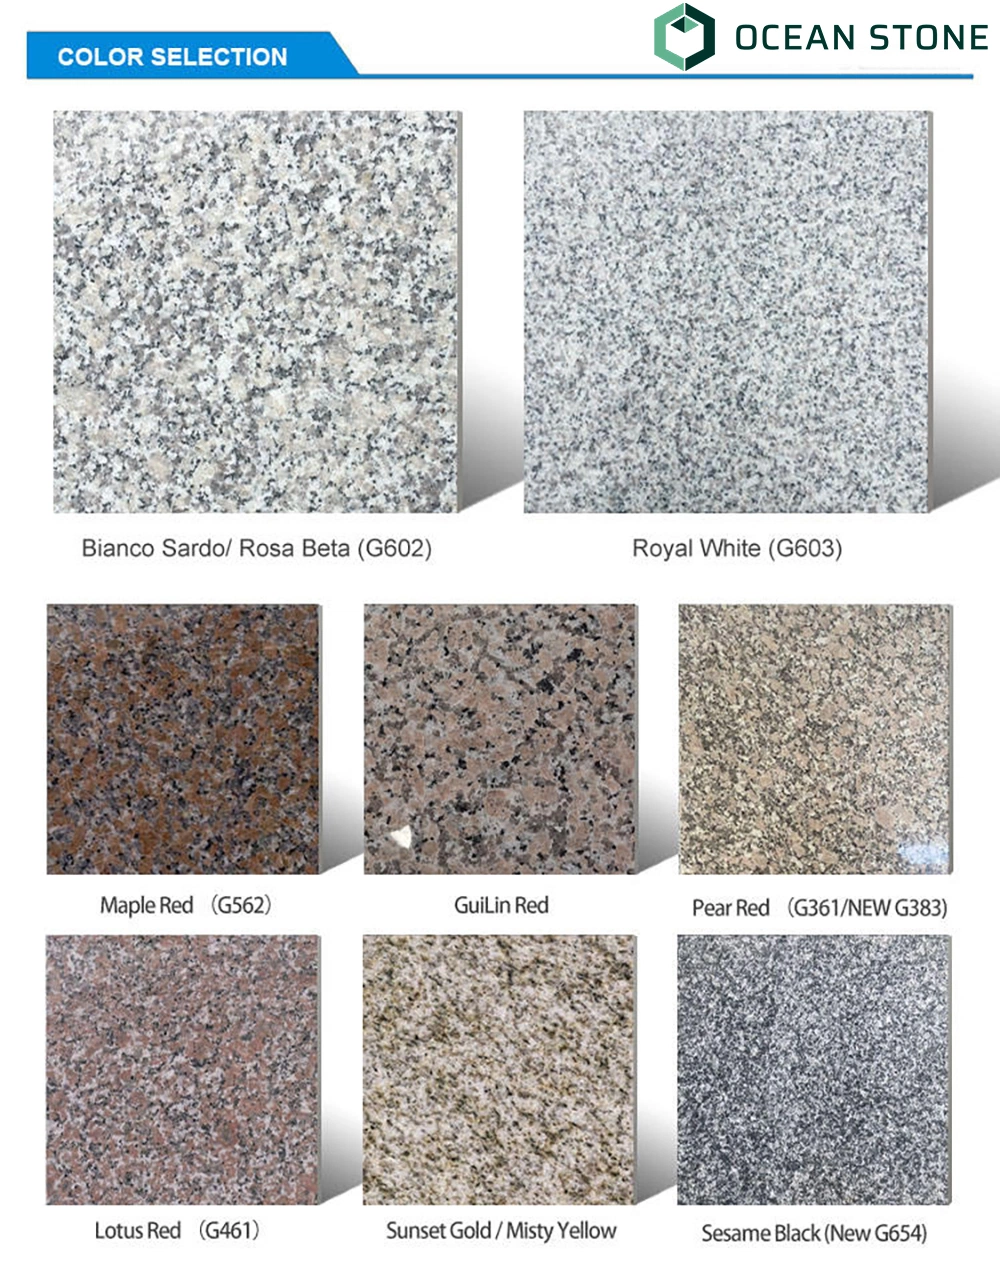 Night Snow Granite for The Wall Decoration Flooring Tile